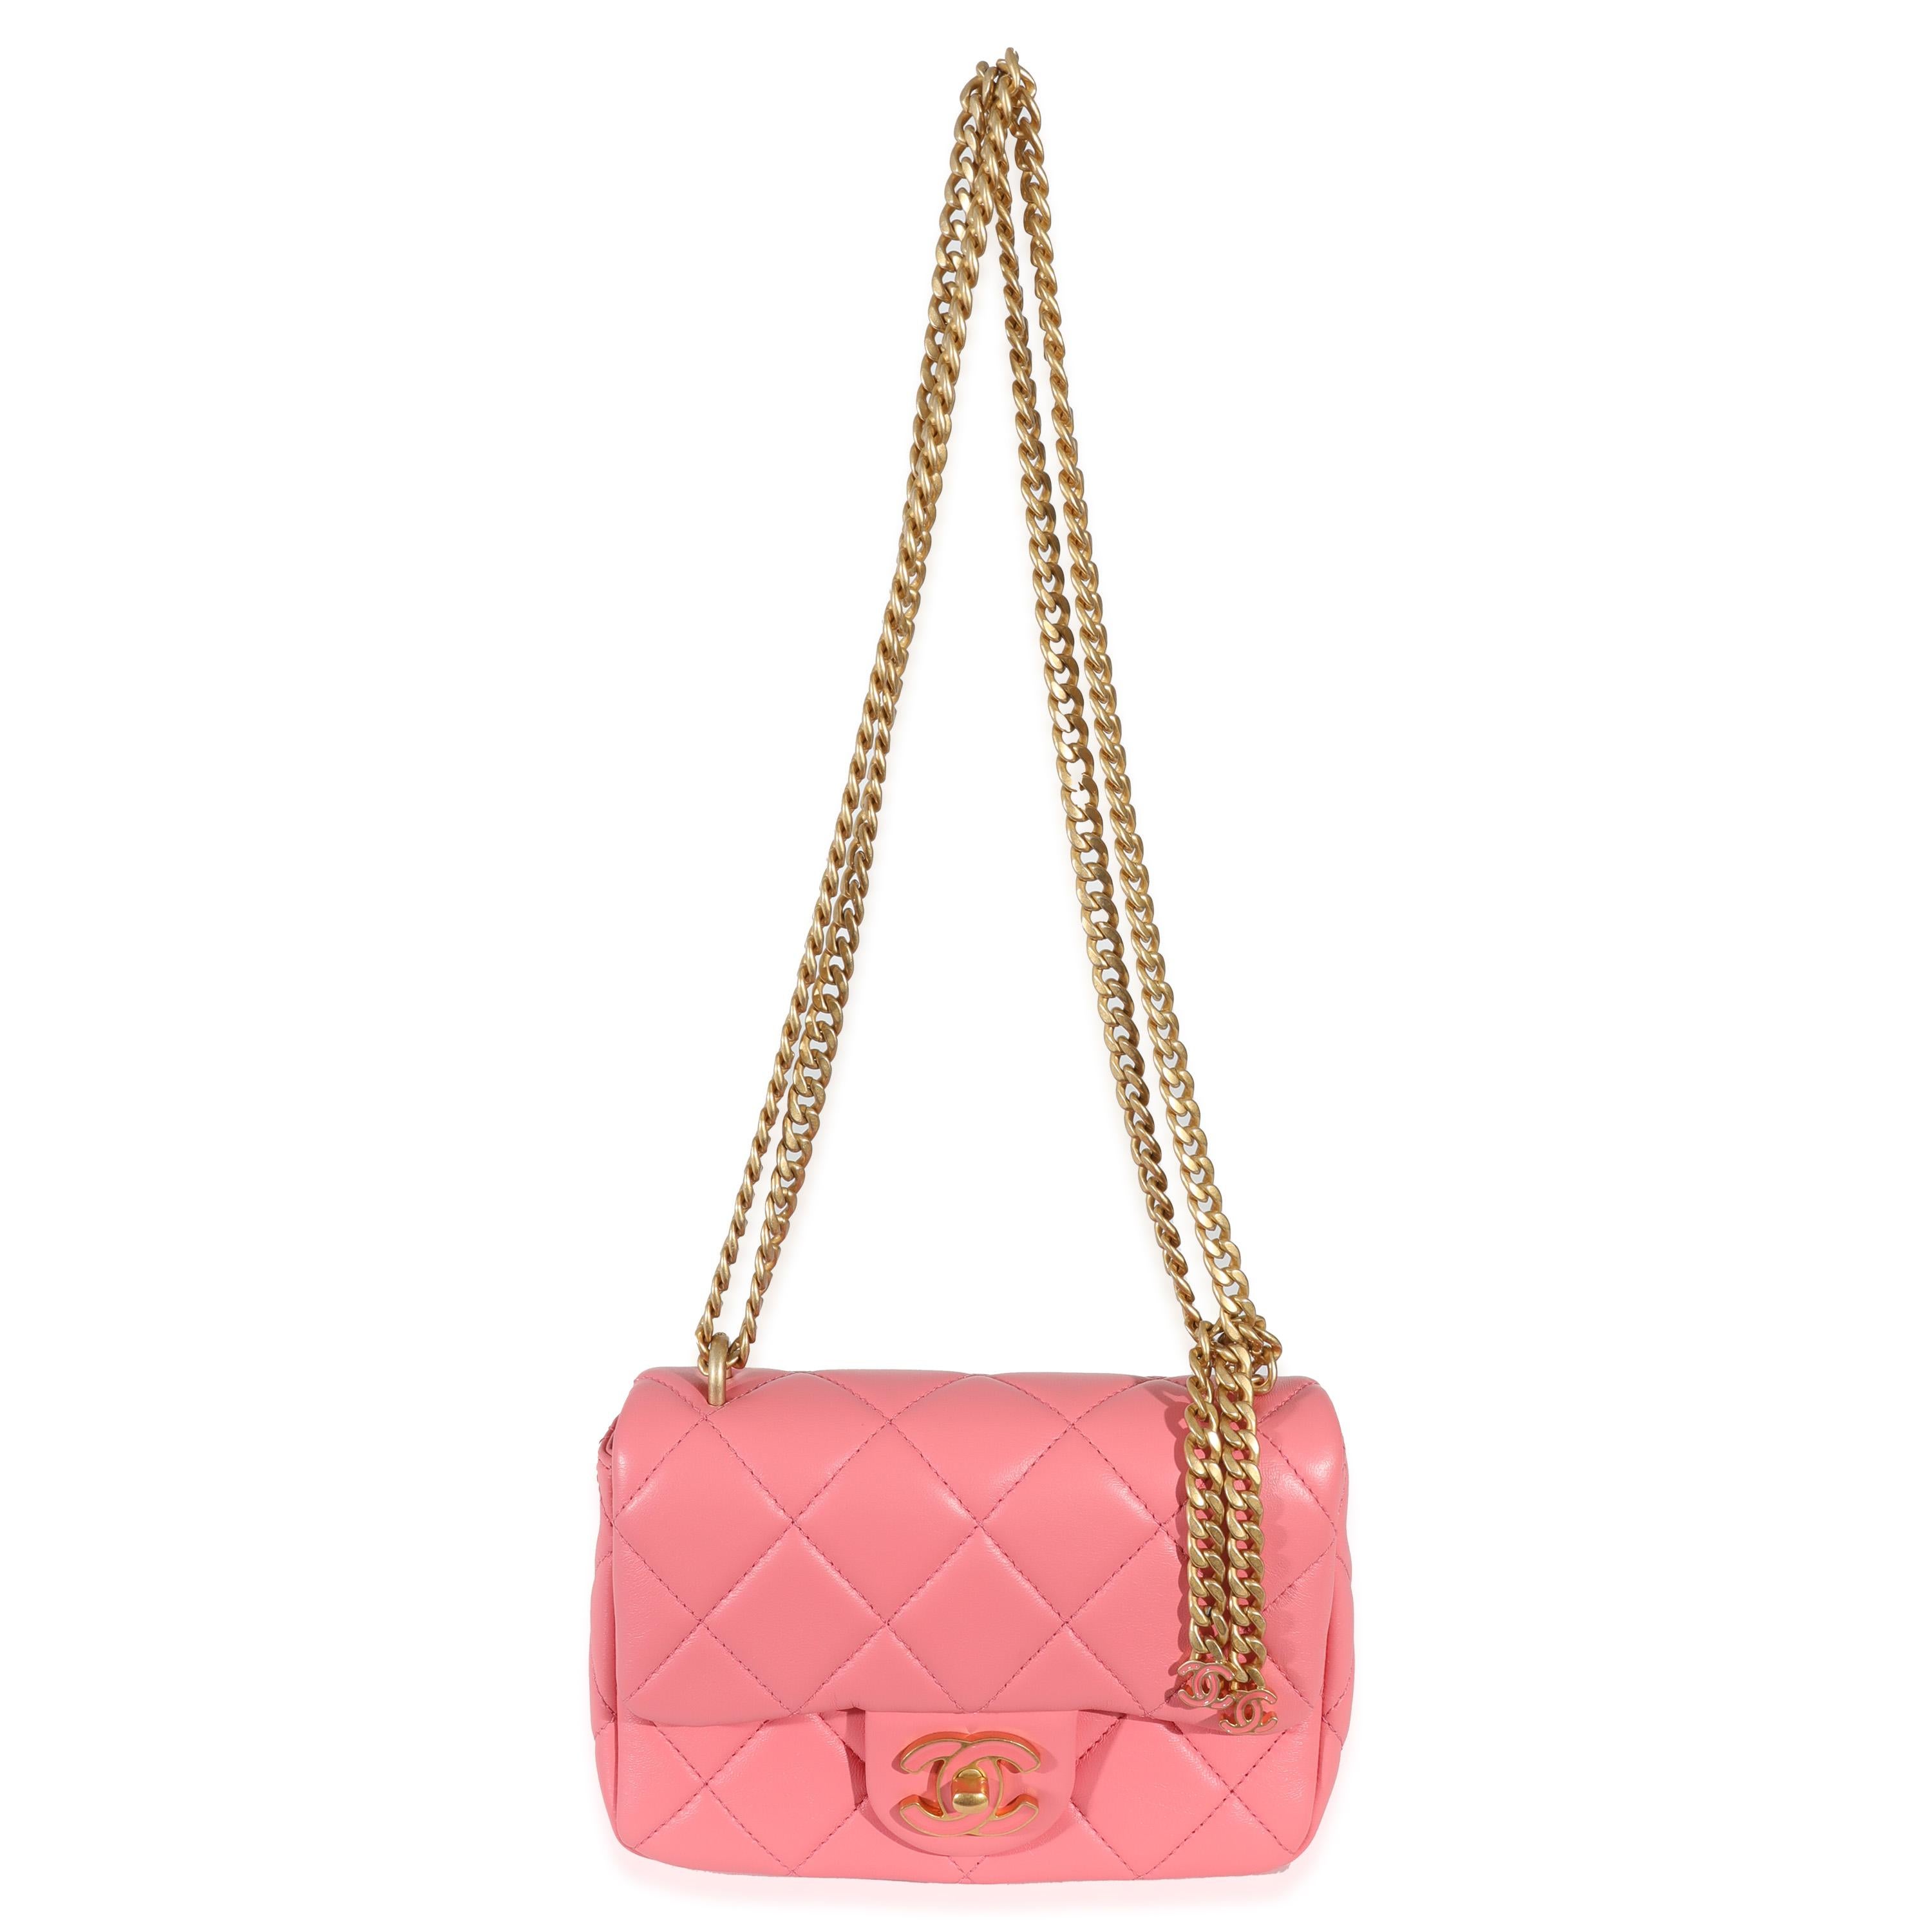 Listing Title: Chanel 22P Pink Lambskin Enamel Mini Pending Square Flap Bag
SKU: 130995
Condition: Pre-owned 
Condition Description: A timeless classic that never goes out of style, the flap bag from Chanel dates back to 1955 and has seen a number